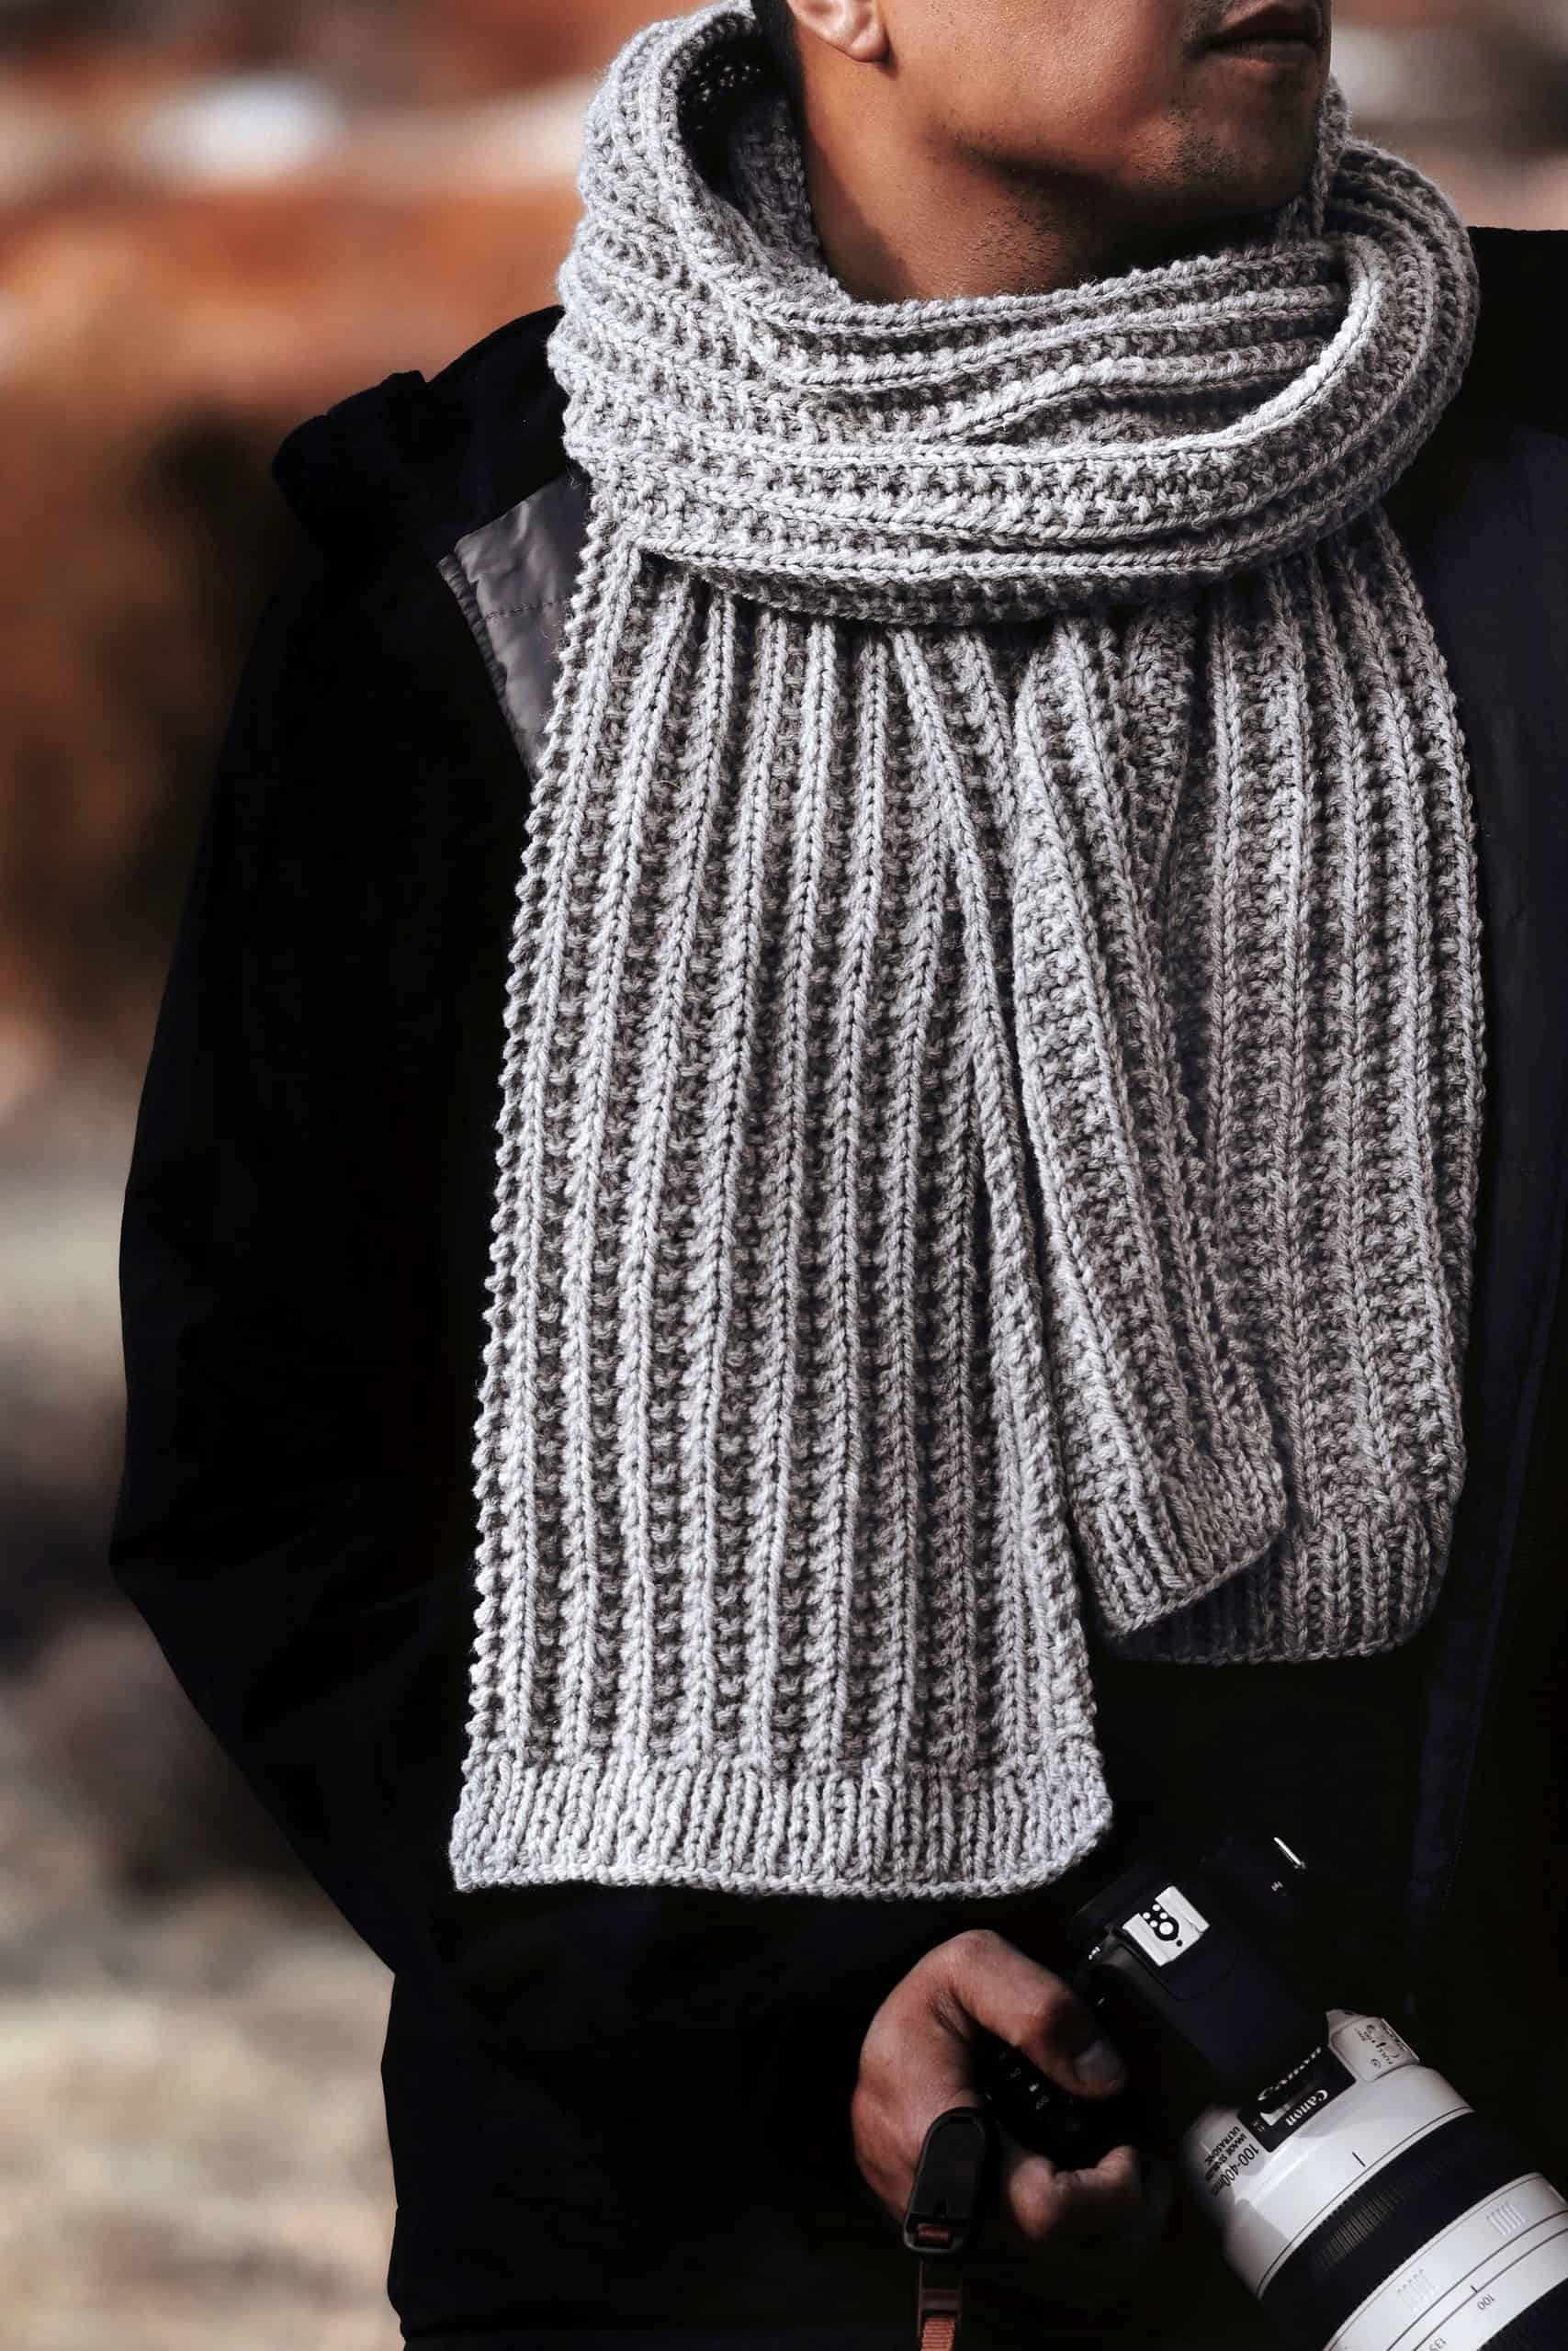 Classic Knit Scarf